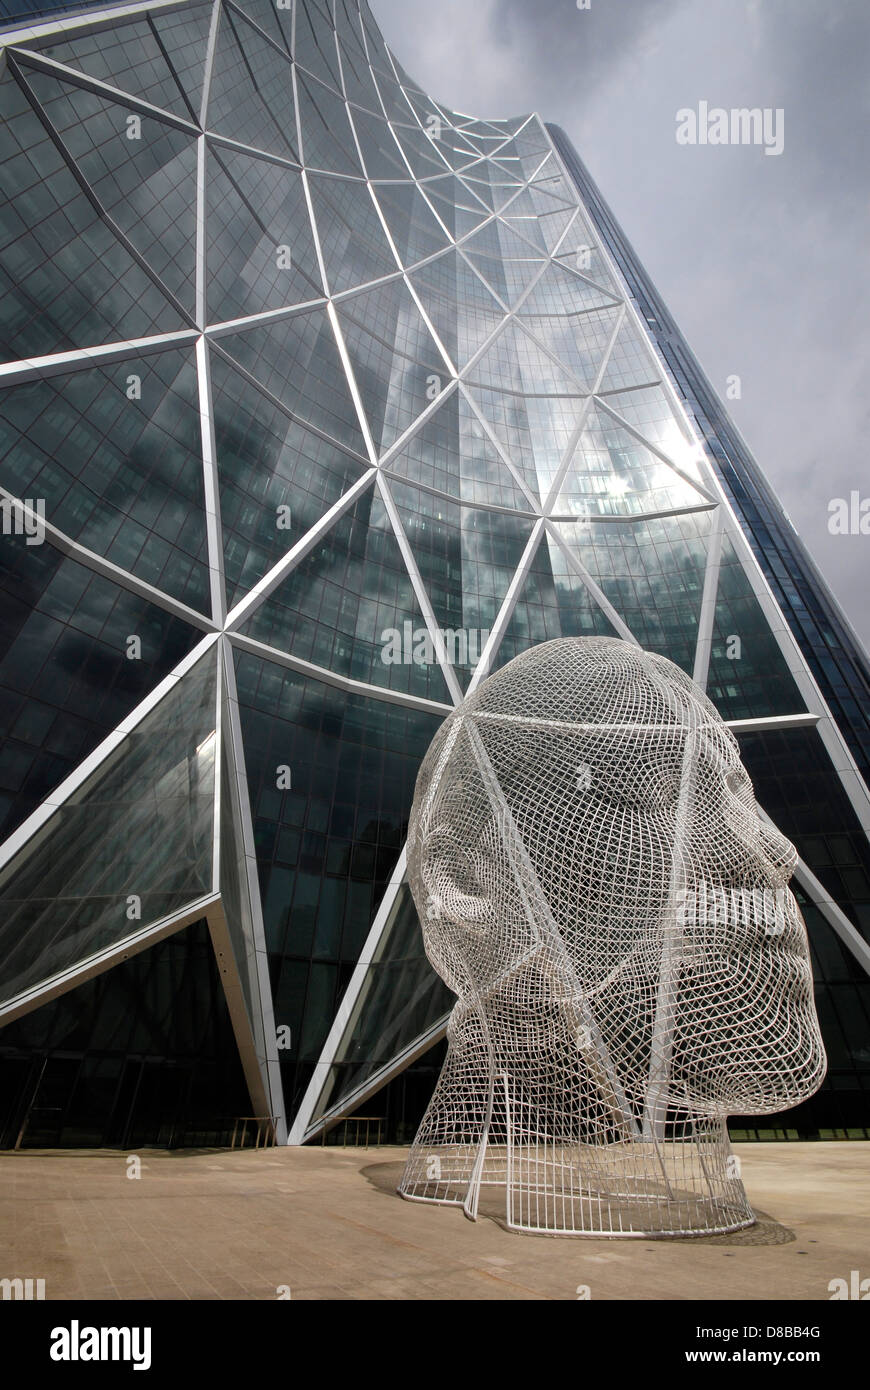 A twelve metre mesh sculpture of a young girl's head by Spanish artist Jaume Plensa stands in front of Calgary's Bow Building. Stock Photo